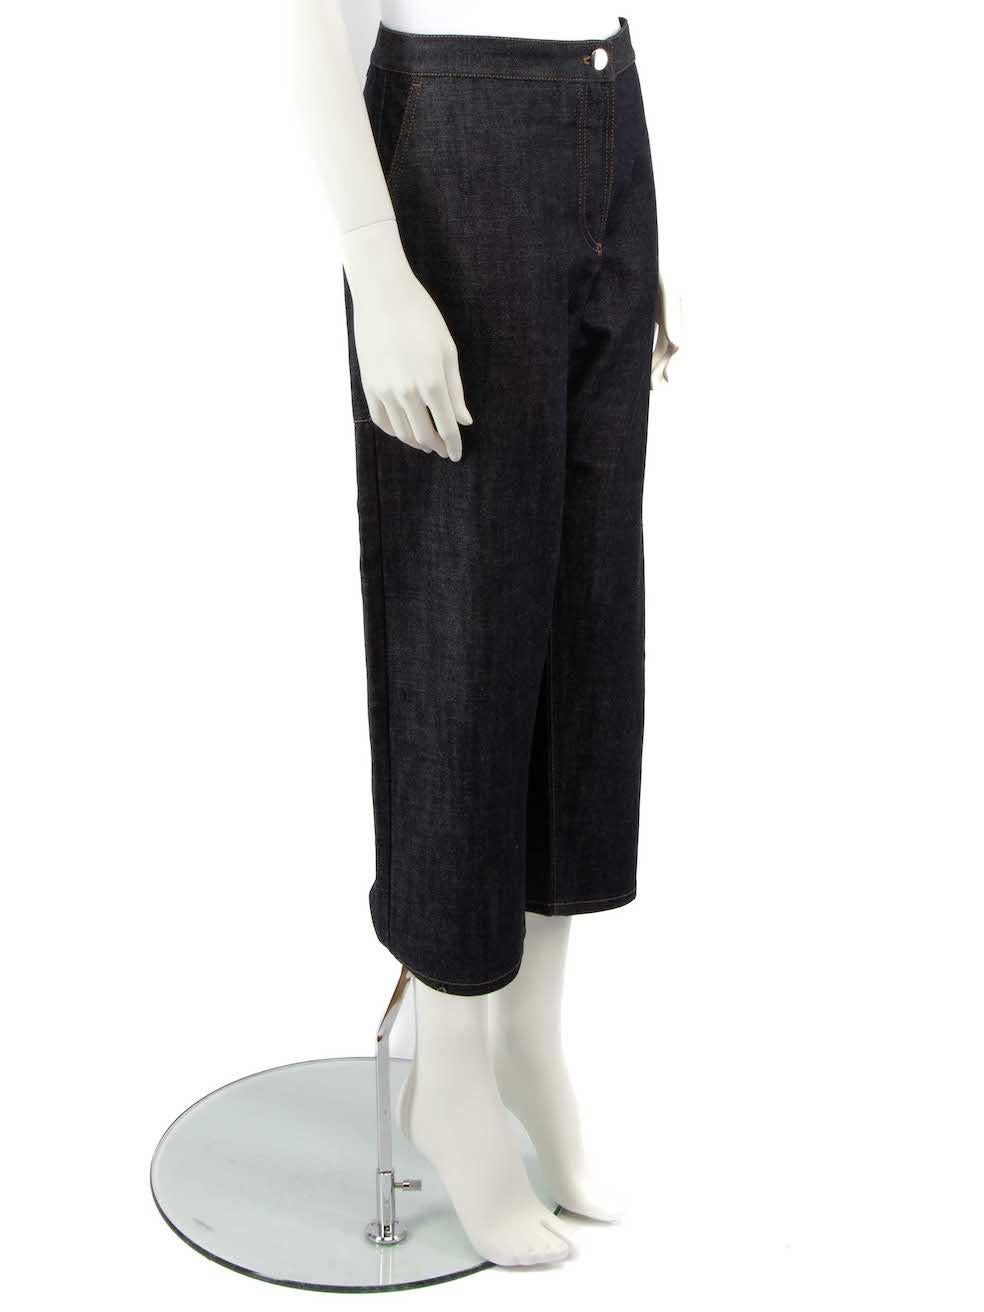 CONDITION is Never worn. No visible wear to culottes is evident on this new Dior designer resale item.
 
Details
Navy
Cotton denim
Culottes
Straight leg
Mid rise
Cropped
Embellished detail
2x Side pockets
2x Back pockets
Fly zip and button